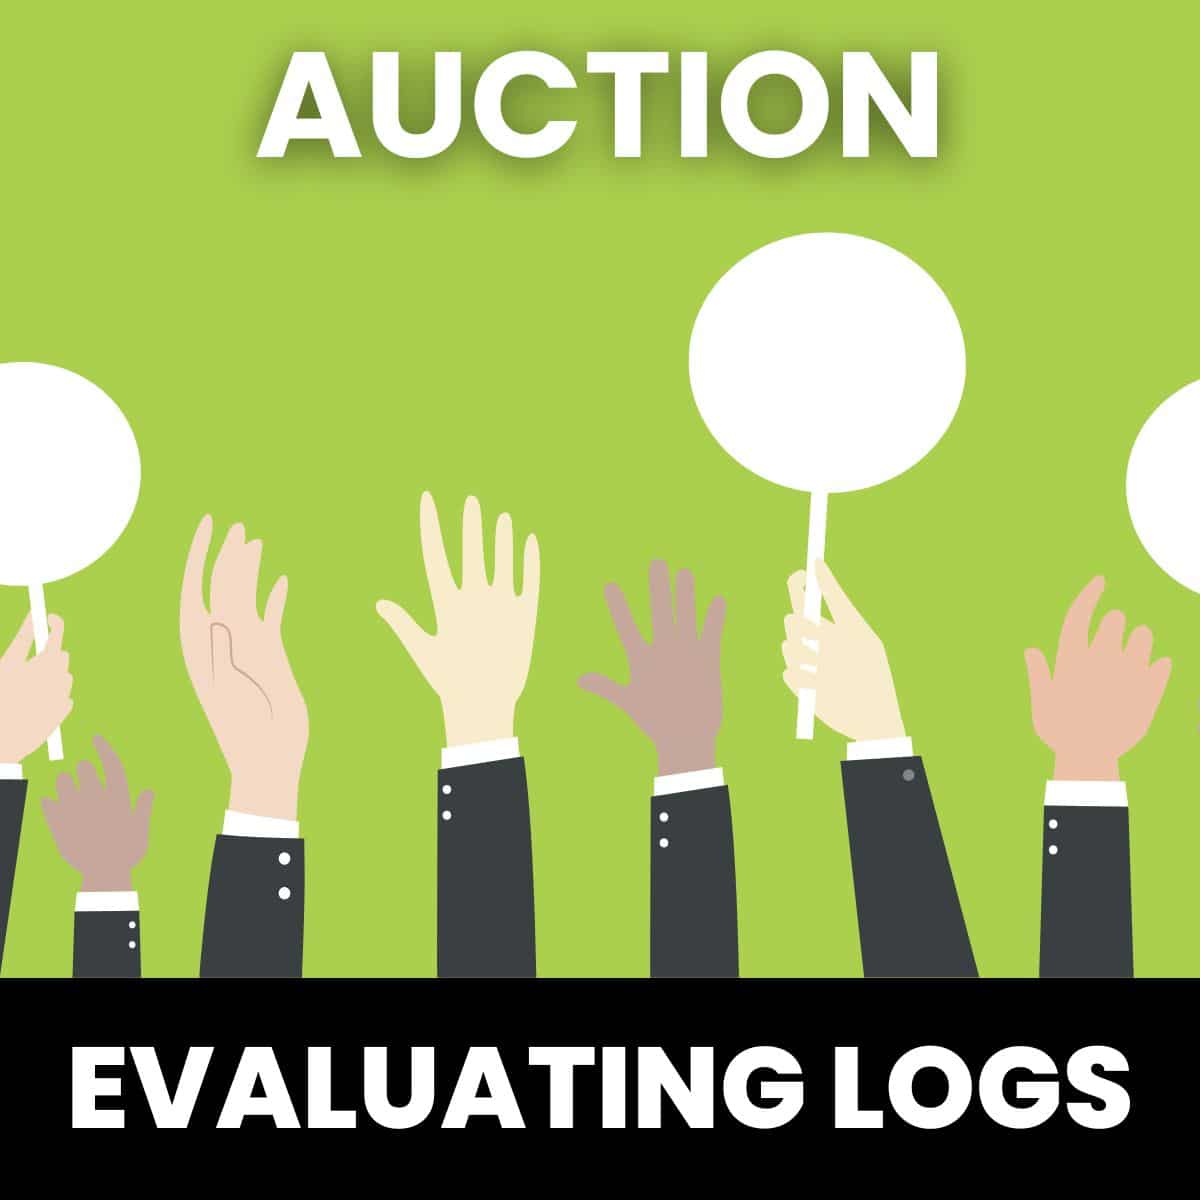 evaluating logs auction activity with hands holding up paddles